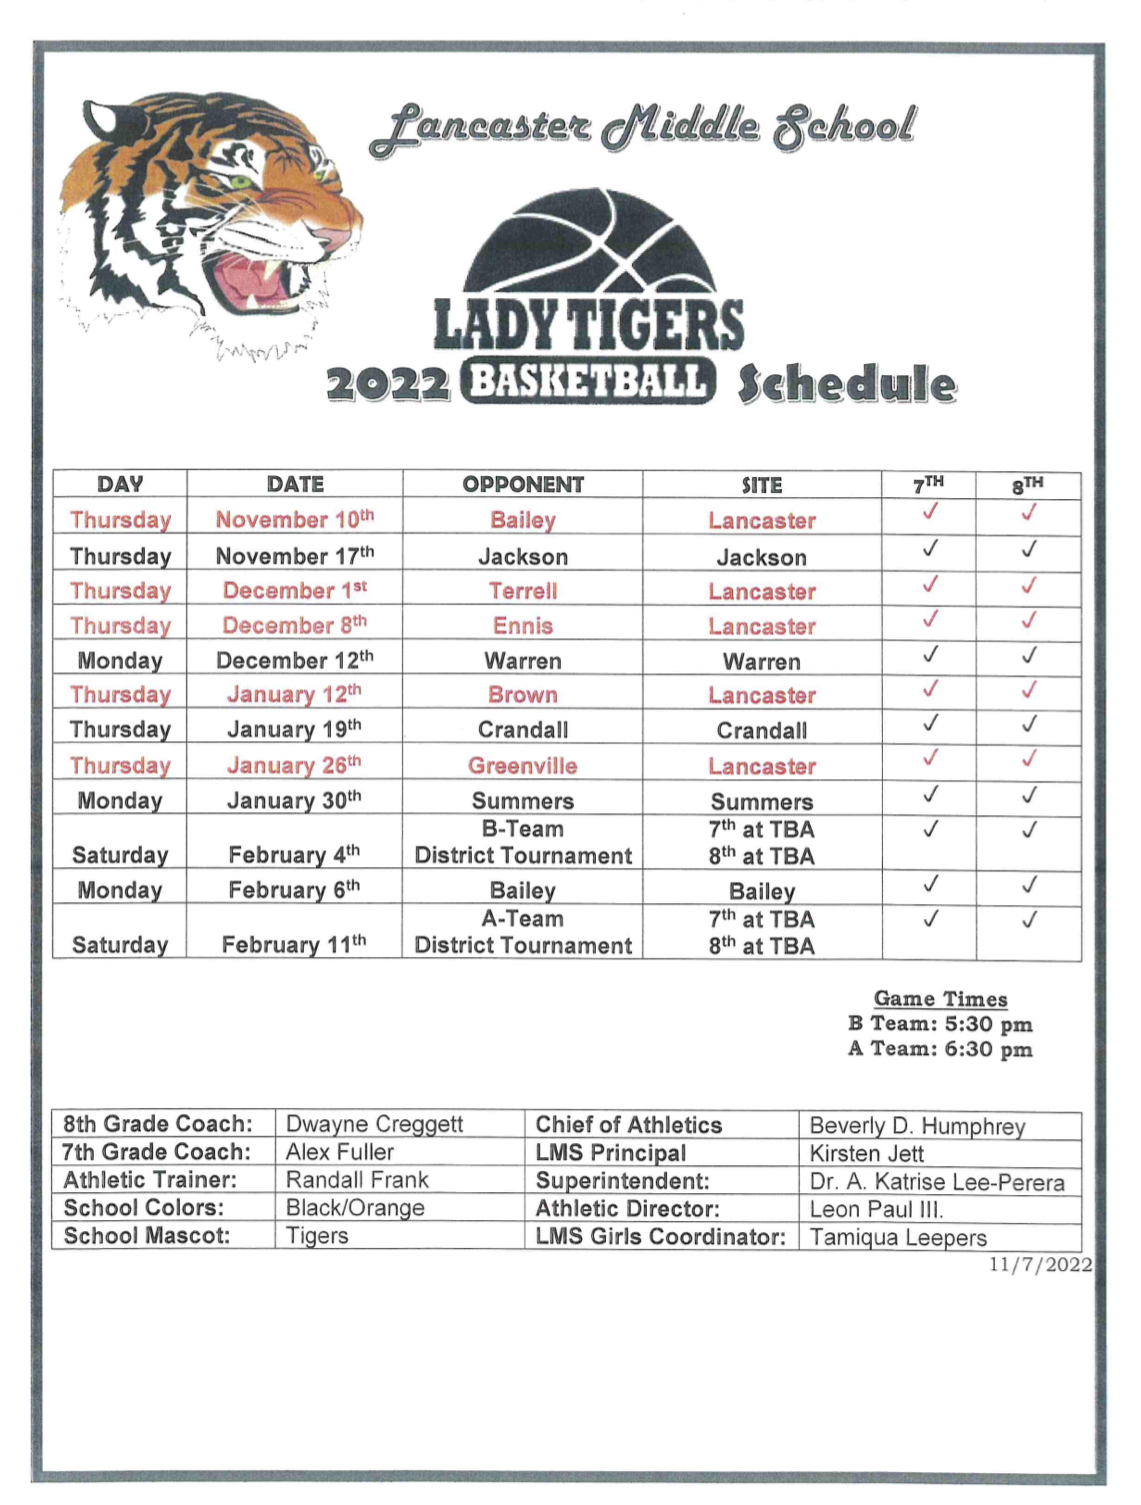 Lady Tigers Middle School BB Schedule